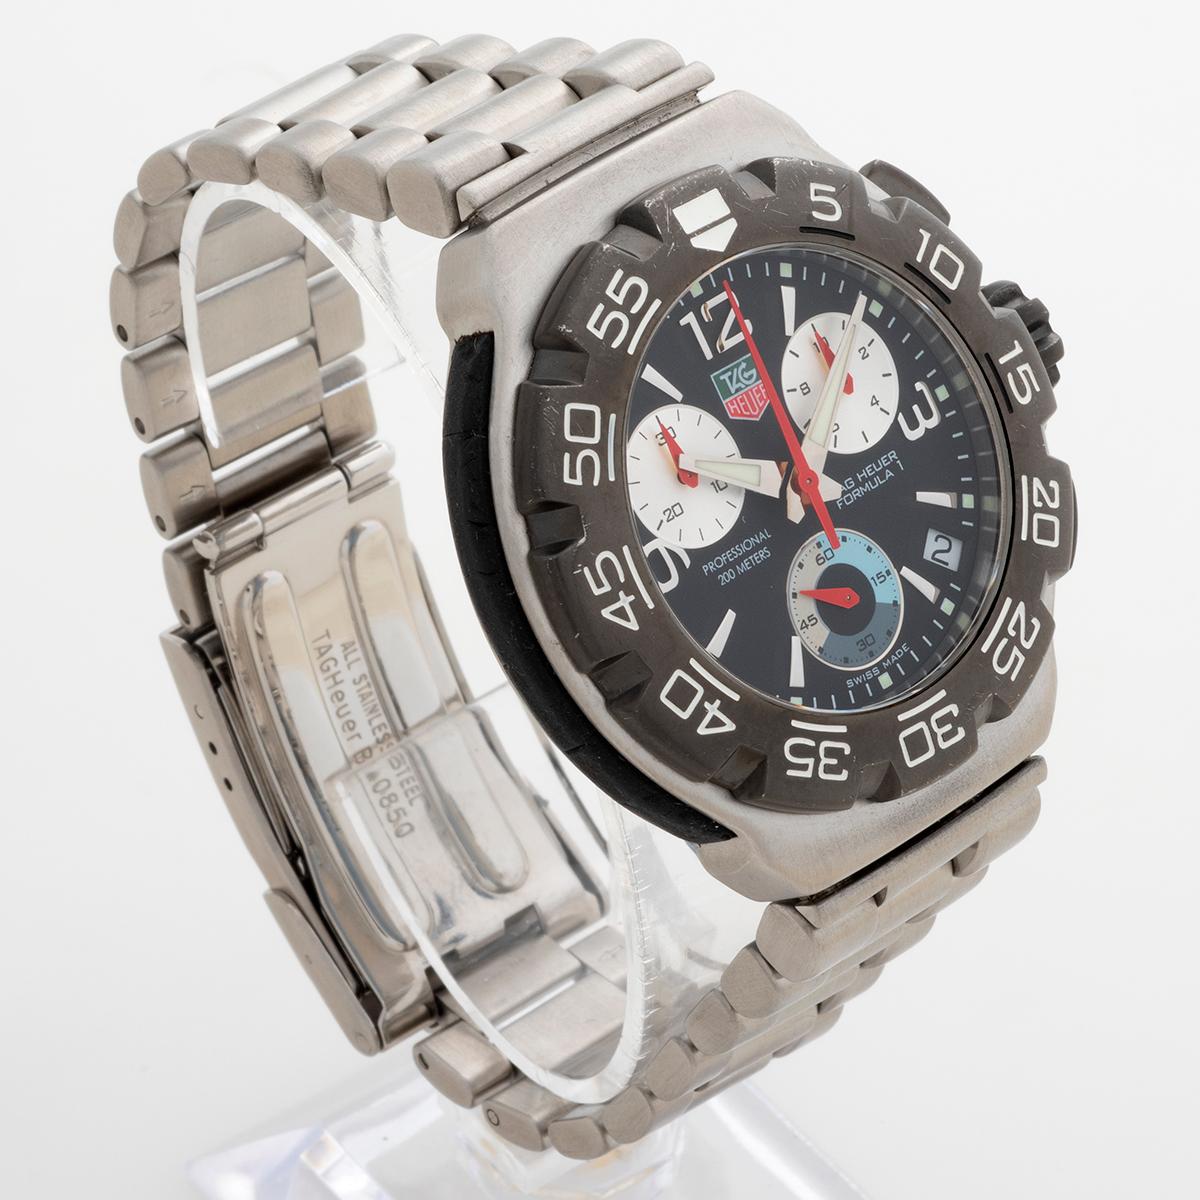 Our neo vintage Tag Heuer Chronograph Formula 1 features a stainless steel 40mm case and stainless steel bracelet with diver's extension. Presented in outstanding condition for its age, with light signs of use overall, this colourful F1 comes from a